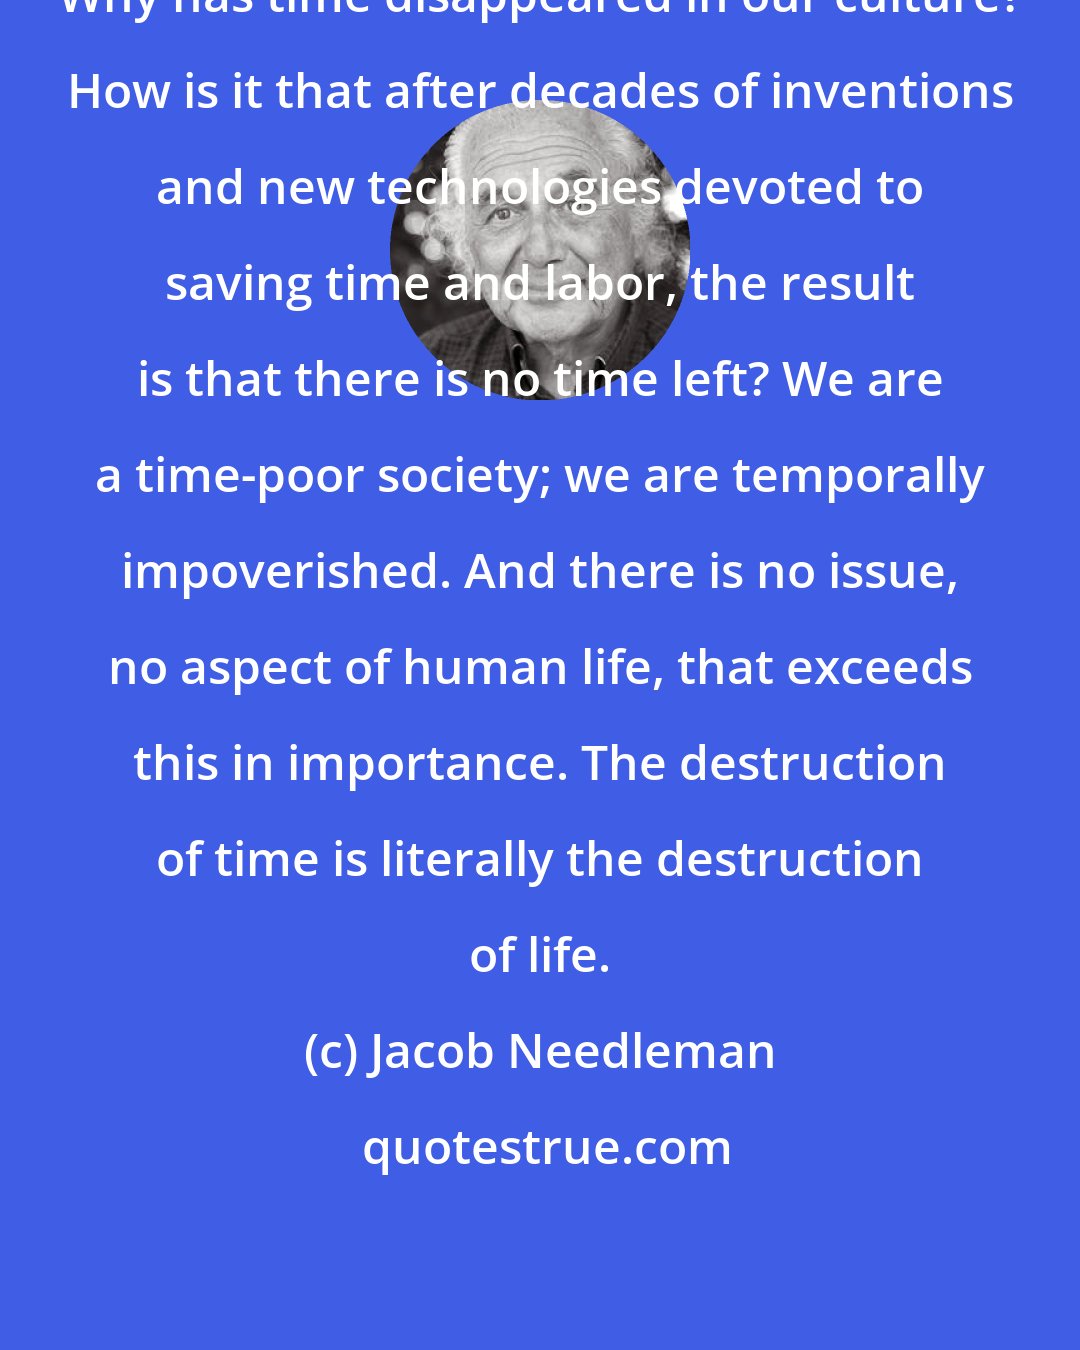 Jacob Needleman: Why has time disappeared in our culture? How is it that after decades of inventions and new technologies devoted to saving time and labor, the result is that there is no time left? We are a time-poor society; we are temporally impoverished. And there is no issue, no aspect of human life, that exceeds this in importance. The destruction of time is literally the destruction of life.